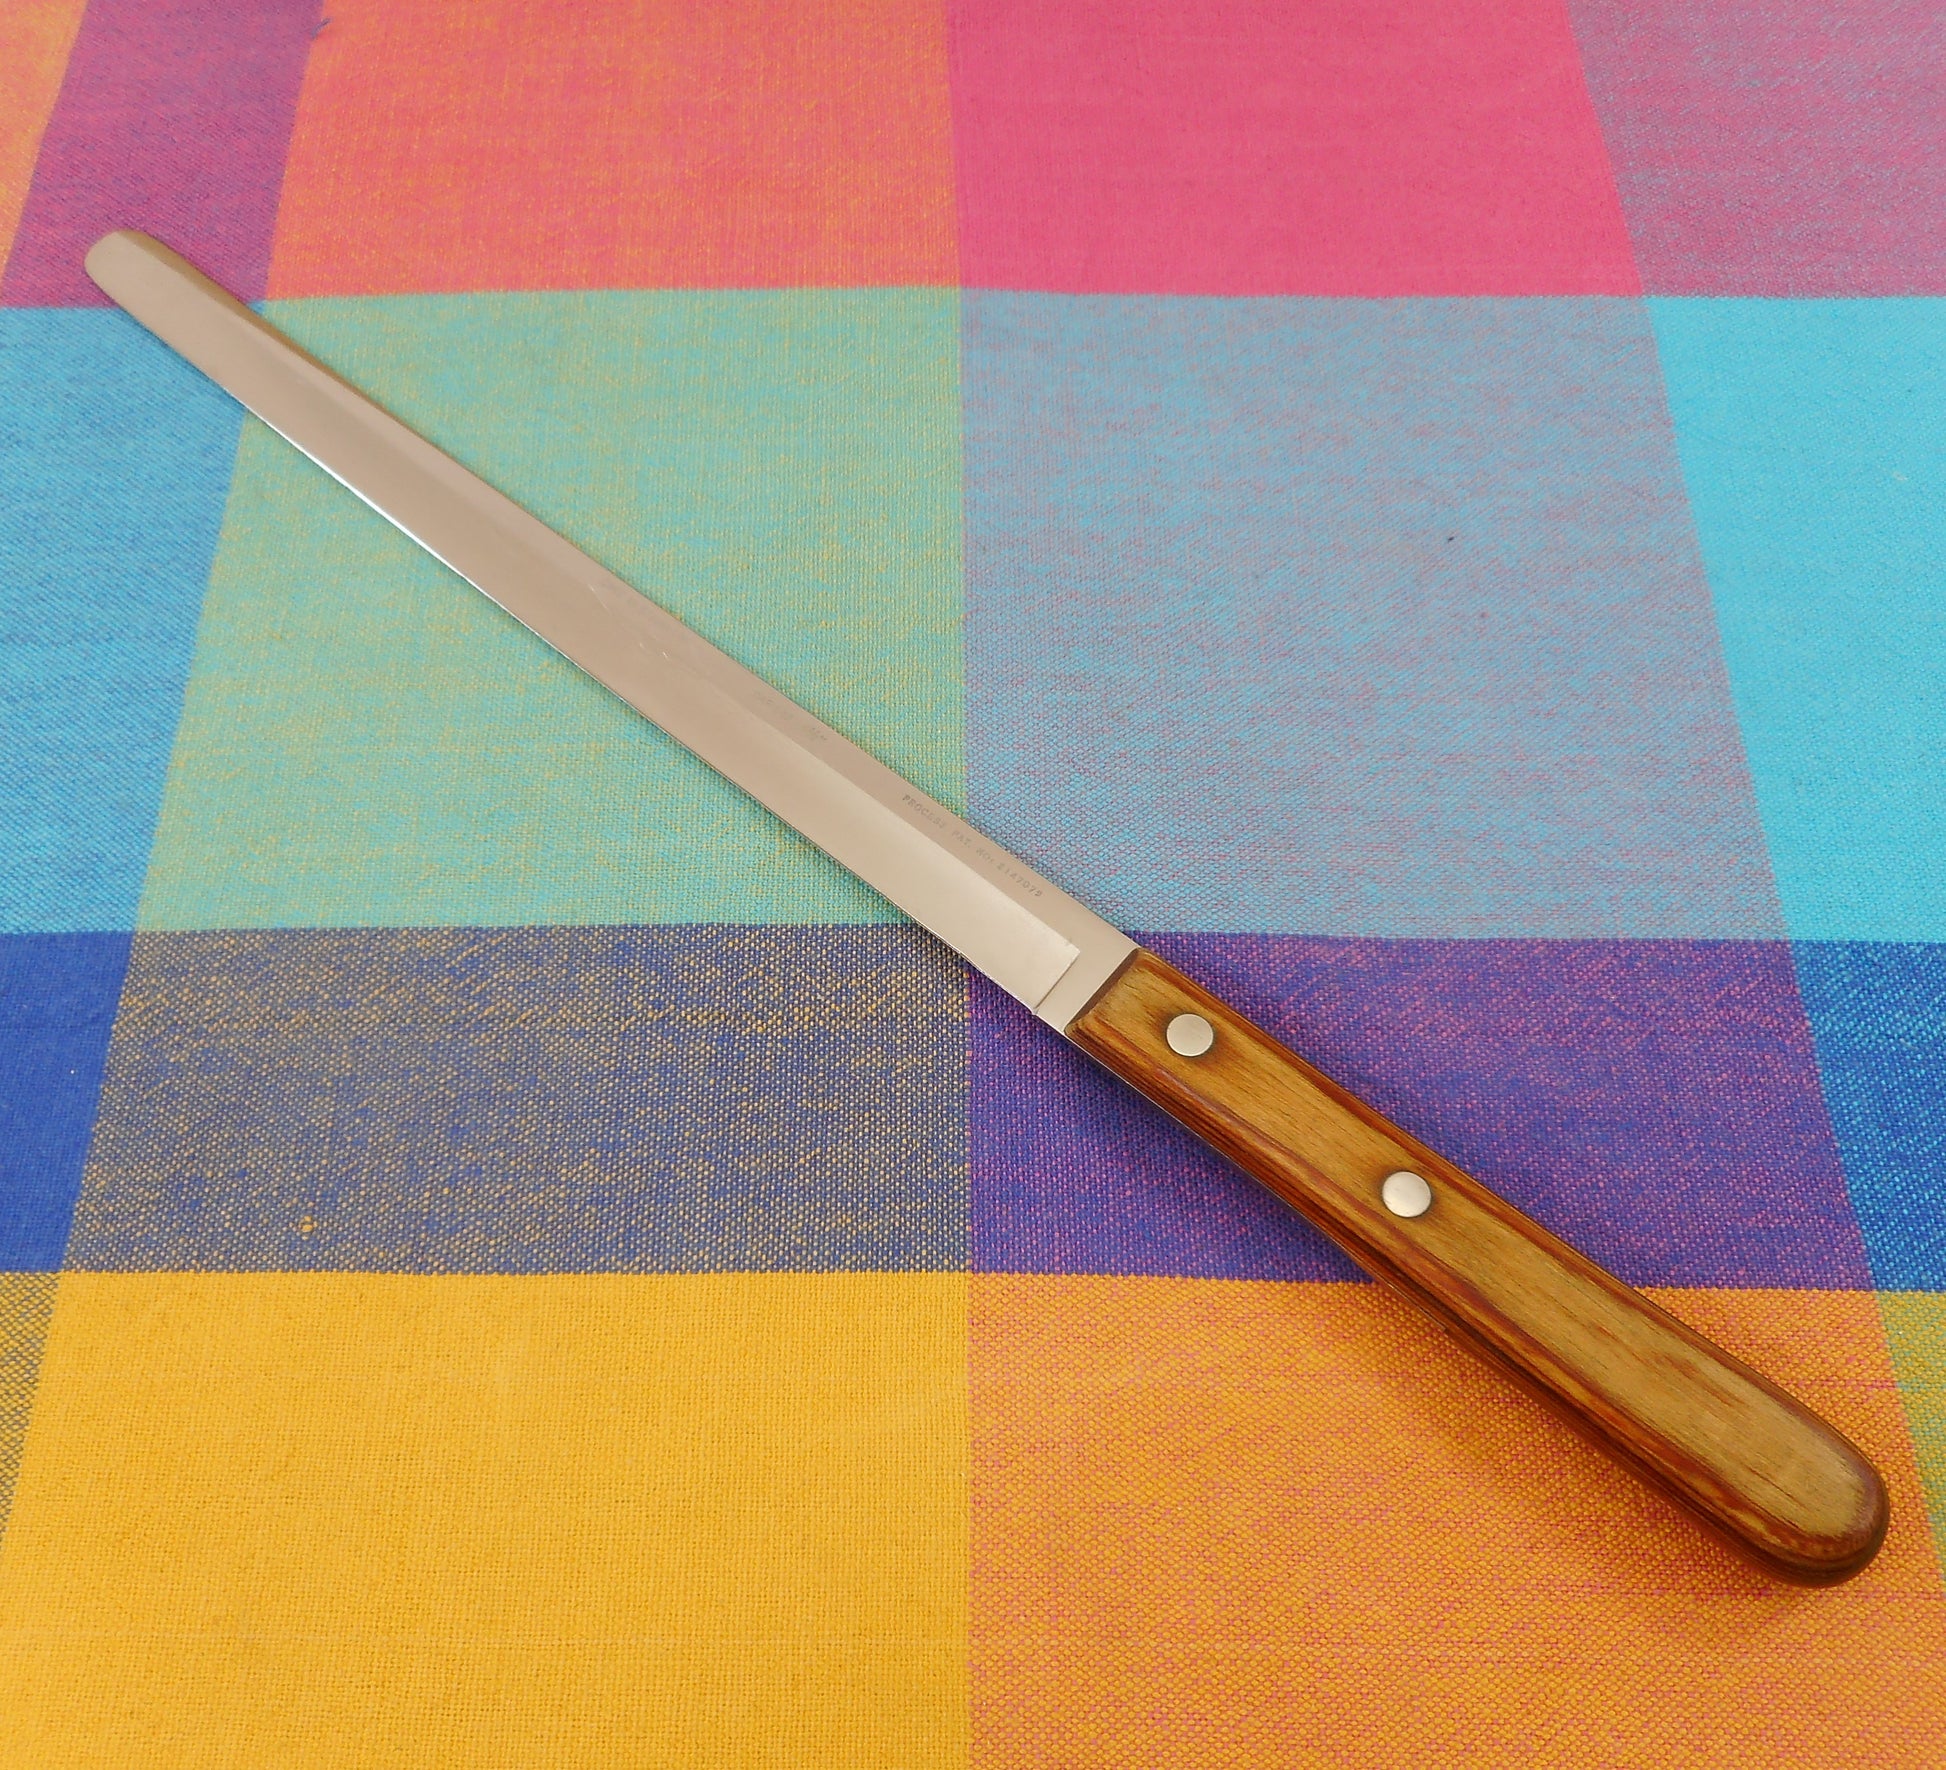 Case XX USA Vintage Kitchen Knives - Stainless Bread Slicing CAP 242 - 9-1/2" Wood Handle